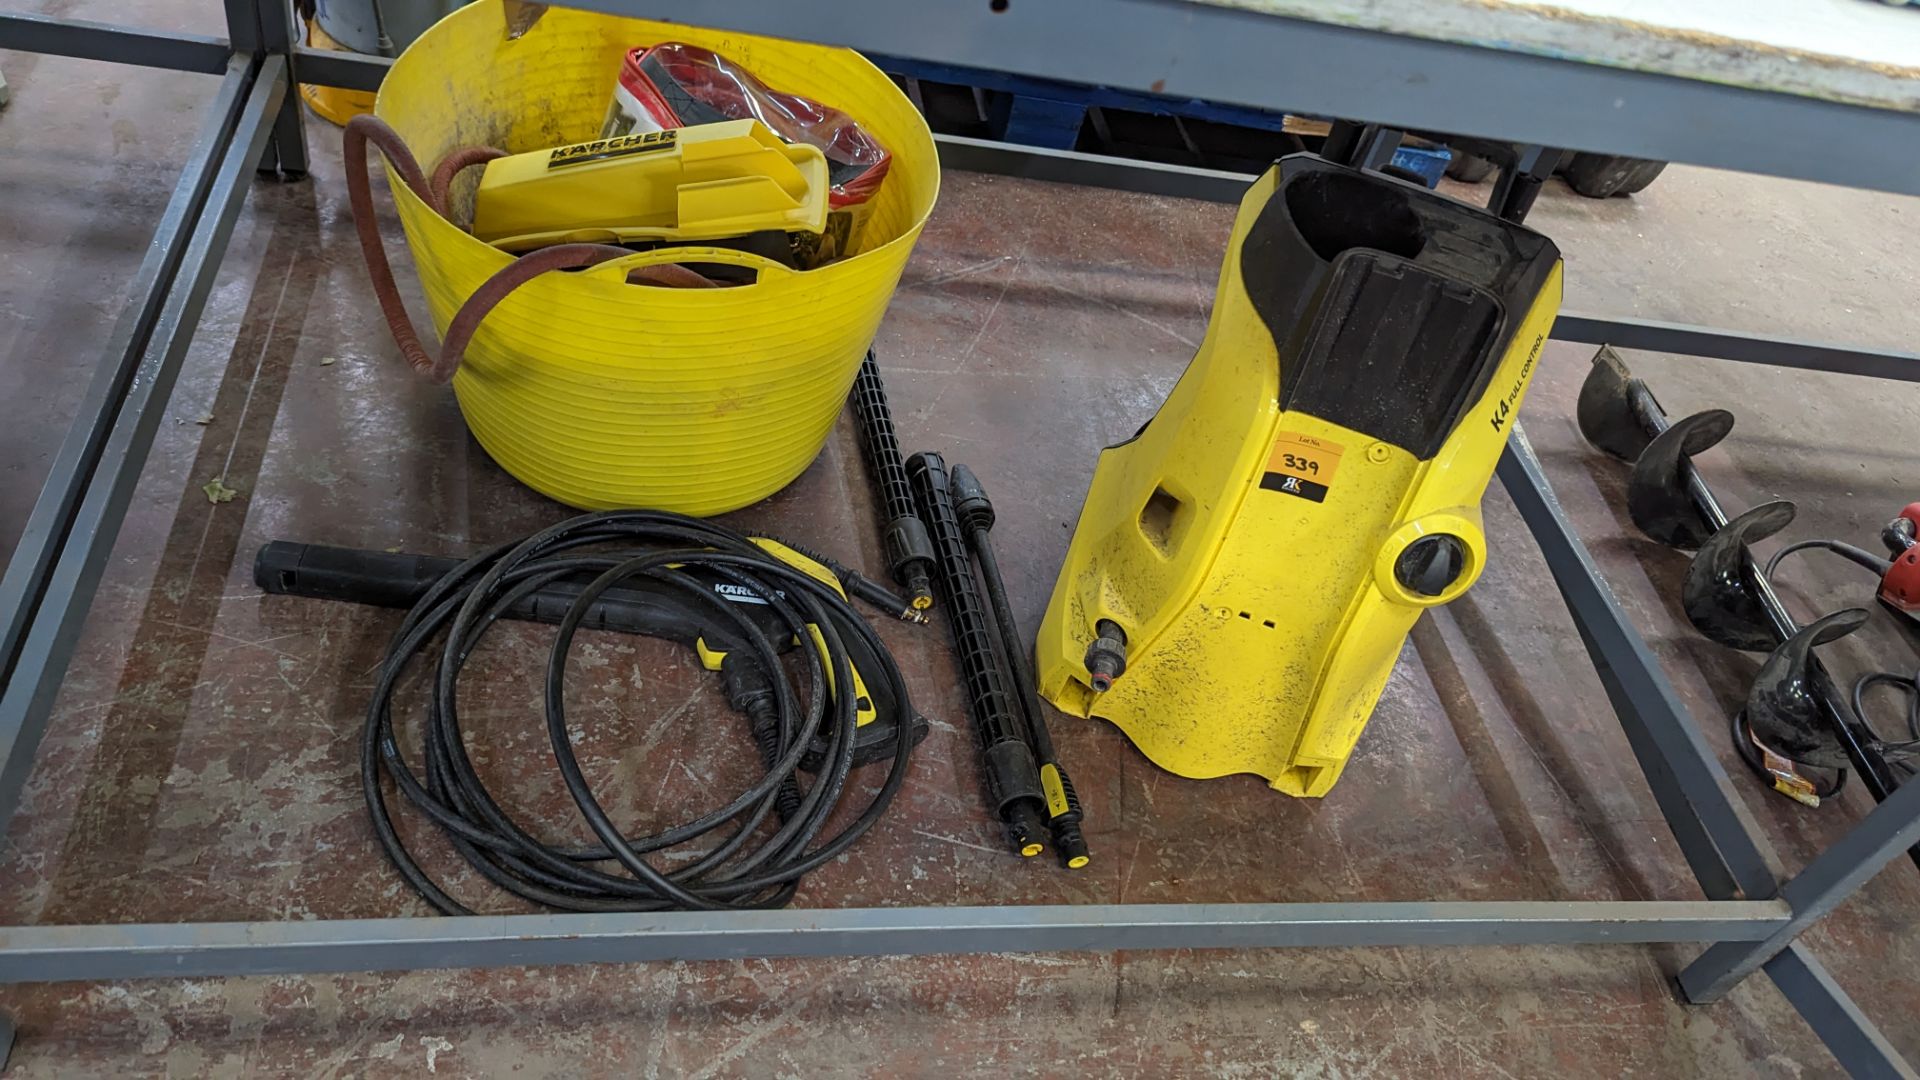 Karcher pressure washer including attachments plus bucket & contents - the total contents of the bay - Image 7 of 7